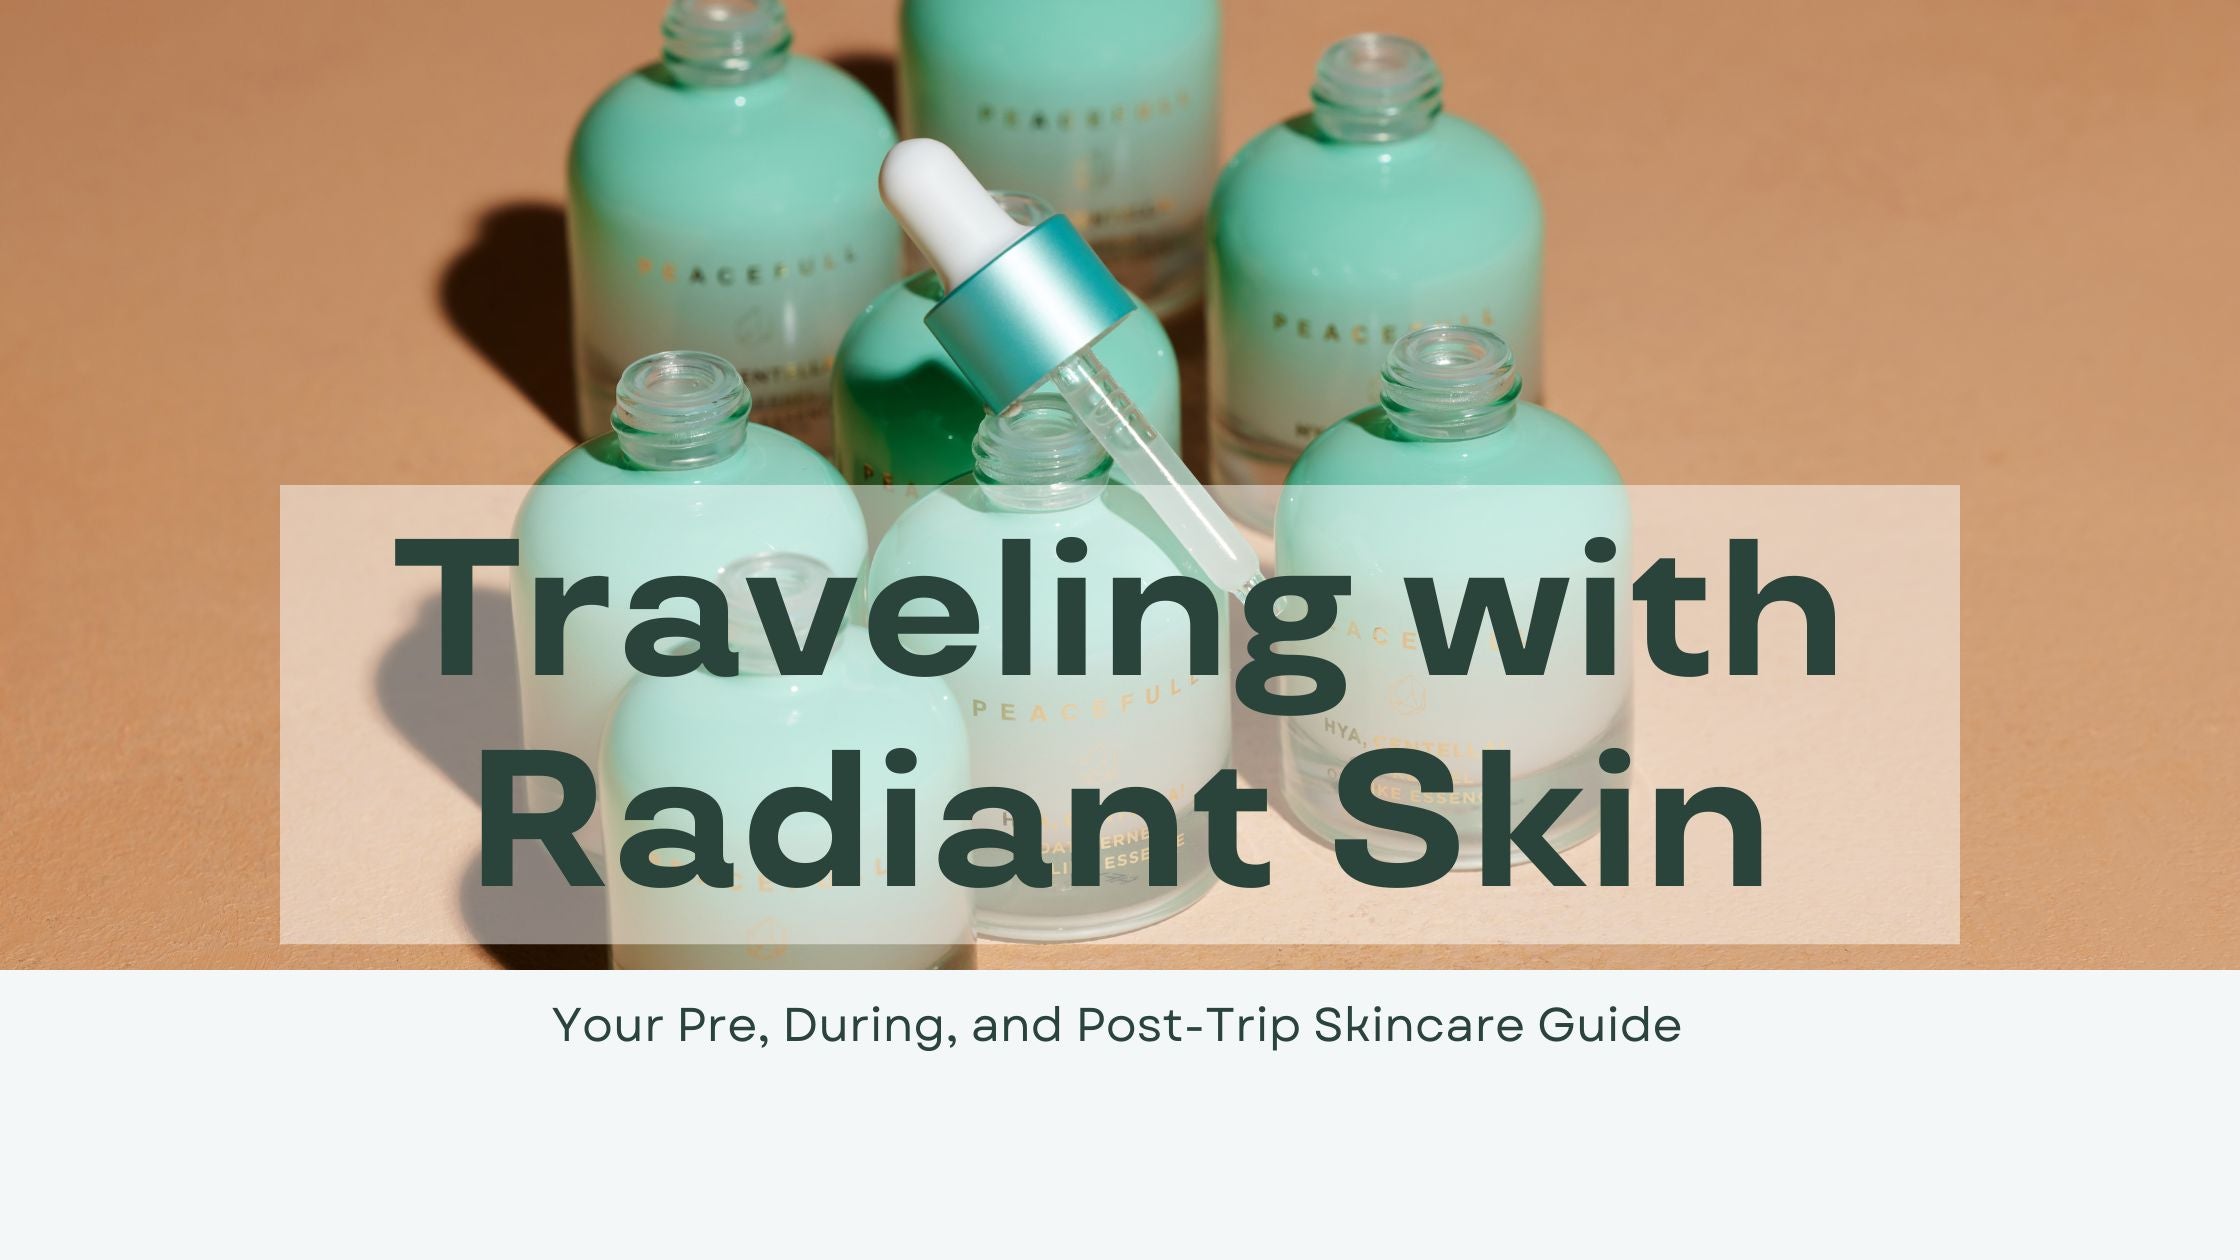 Traveling with Radiant Skin: Your Pre, During, and Post-Trip Skincare Guide